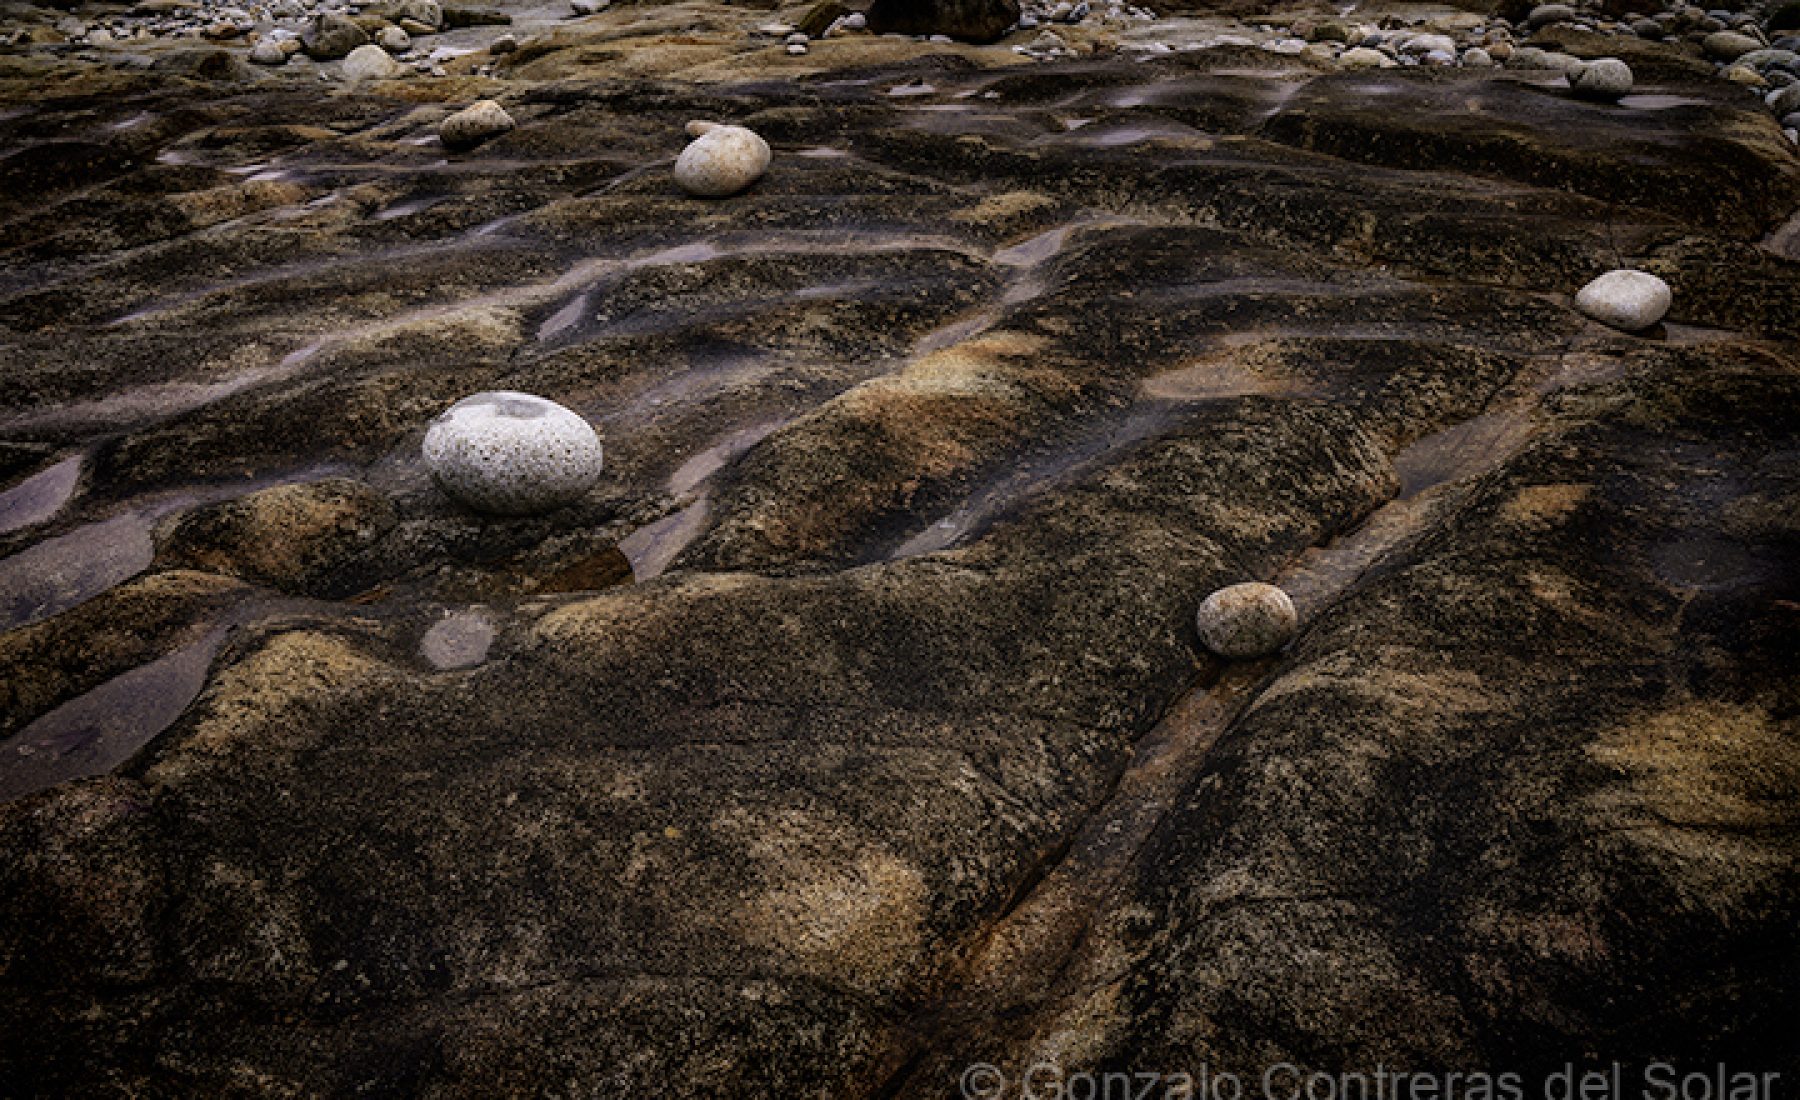 Polished rocks at Puerto Ranquil